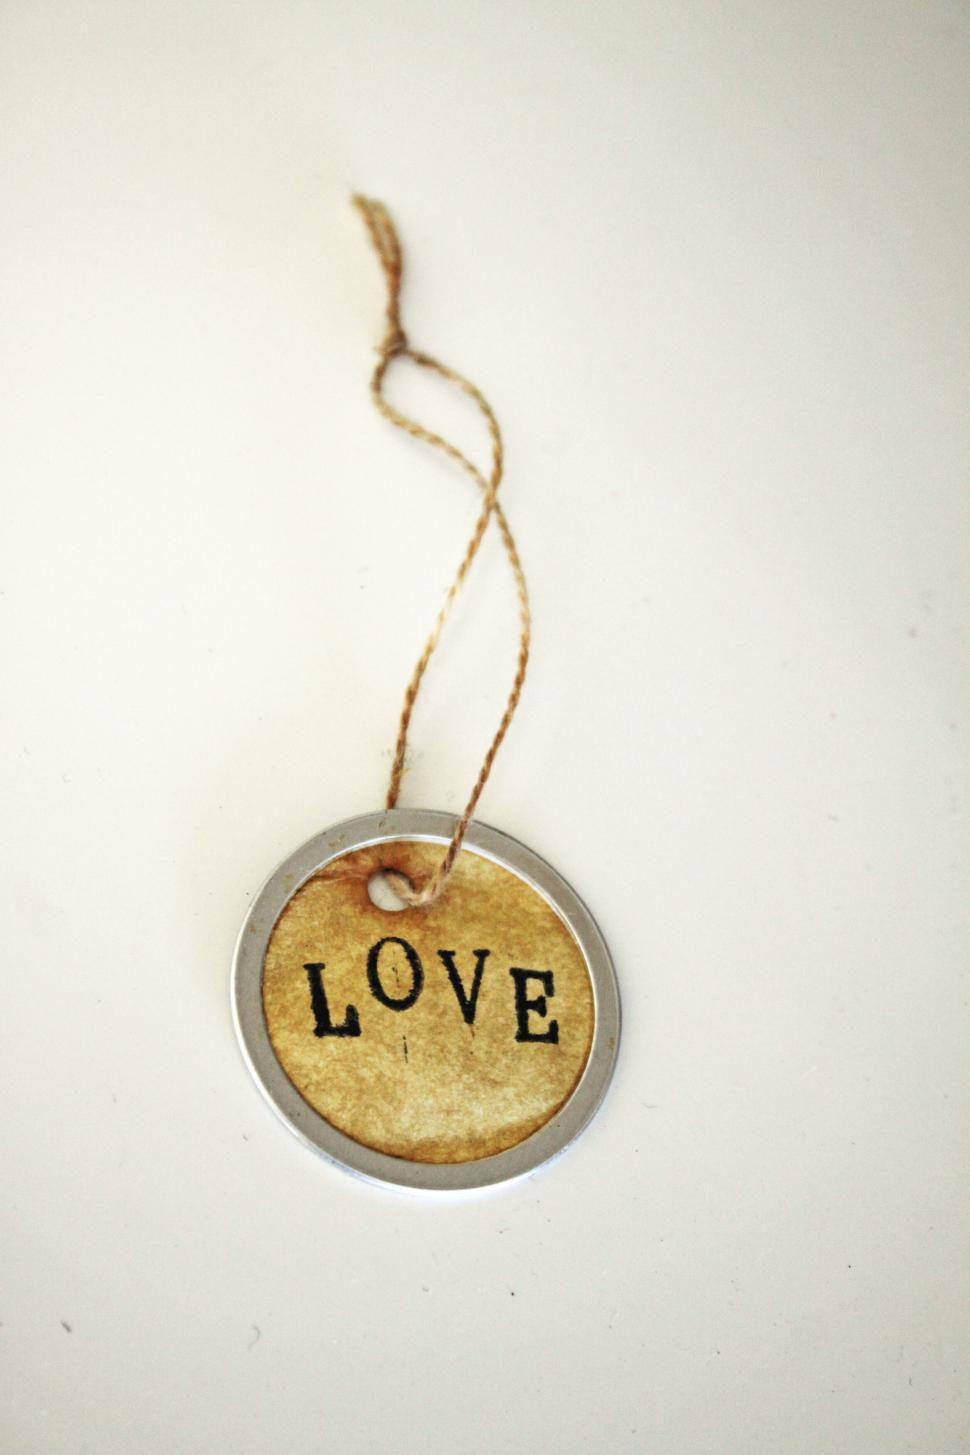 Free Image of Rustic love tag dangling on twine 